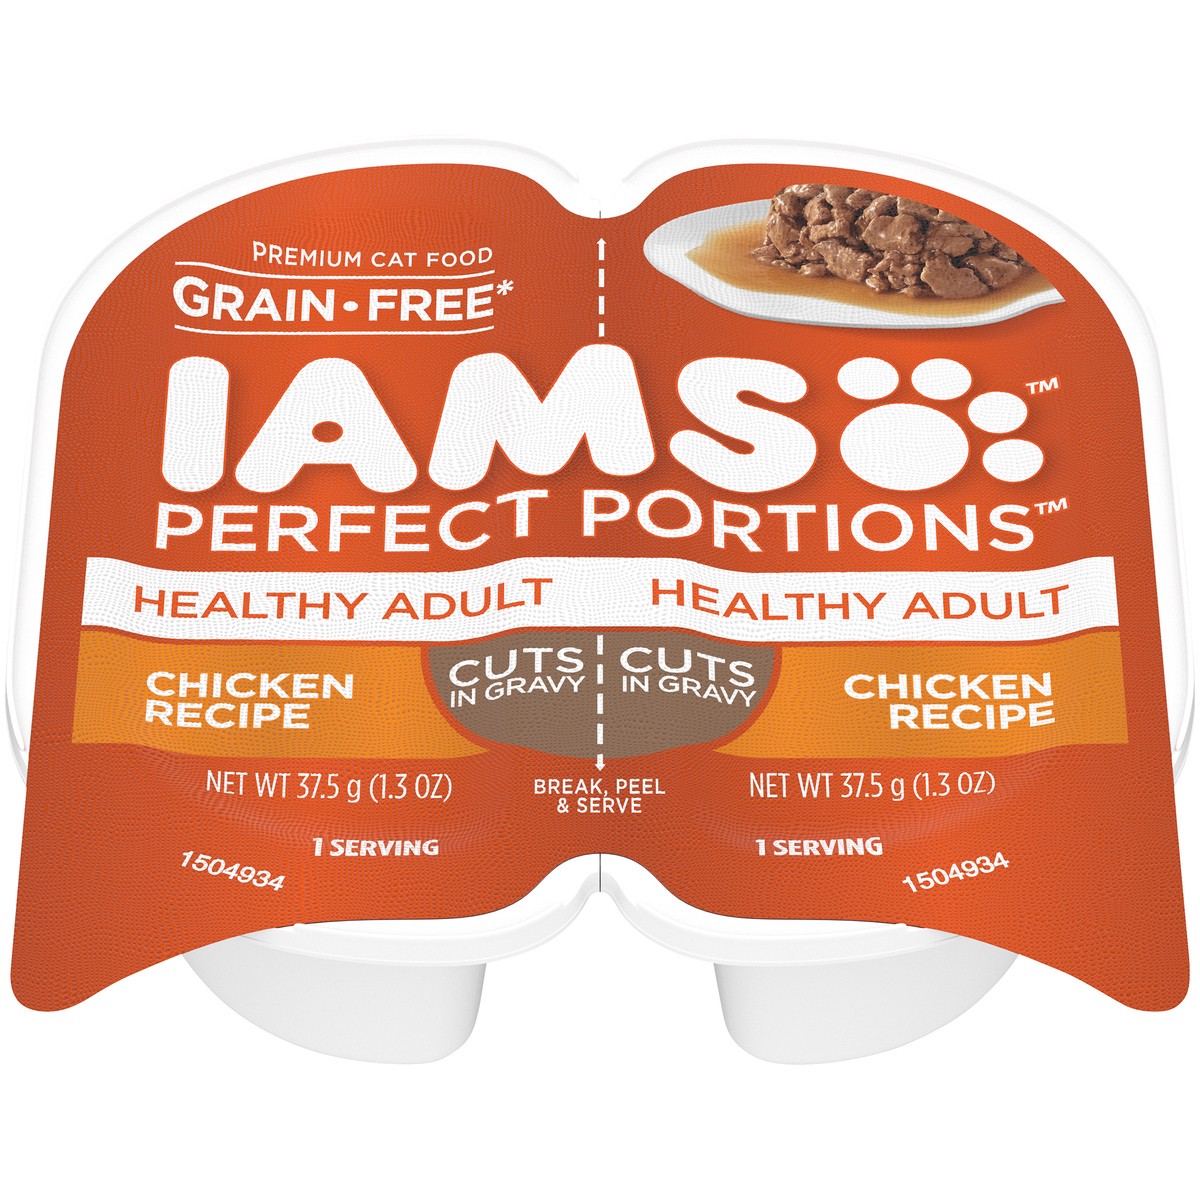 slide 1 of 4, Iams Perfect Portions Cuts in Gravy Healthy Adult Chicken Recipe Premium Cat Food 2-1.3 oz. Cups, 2.6 oz